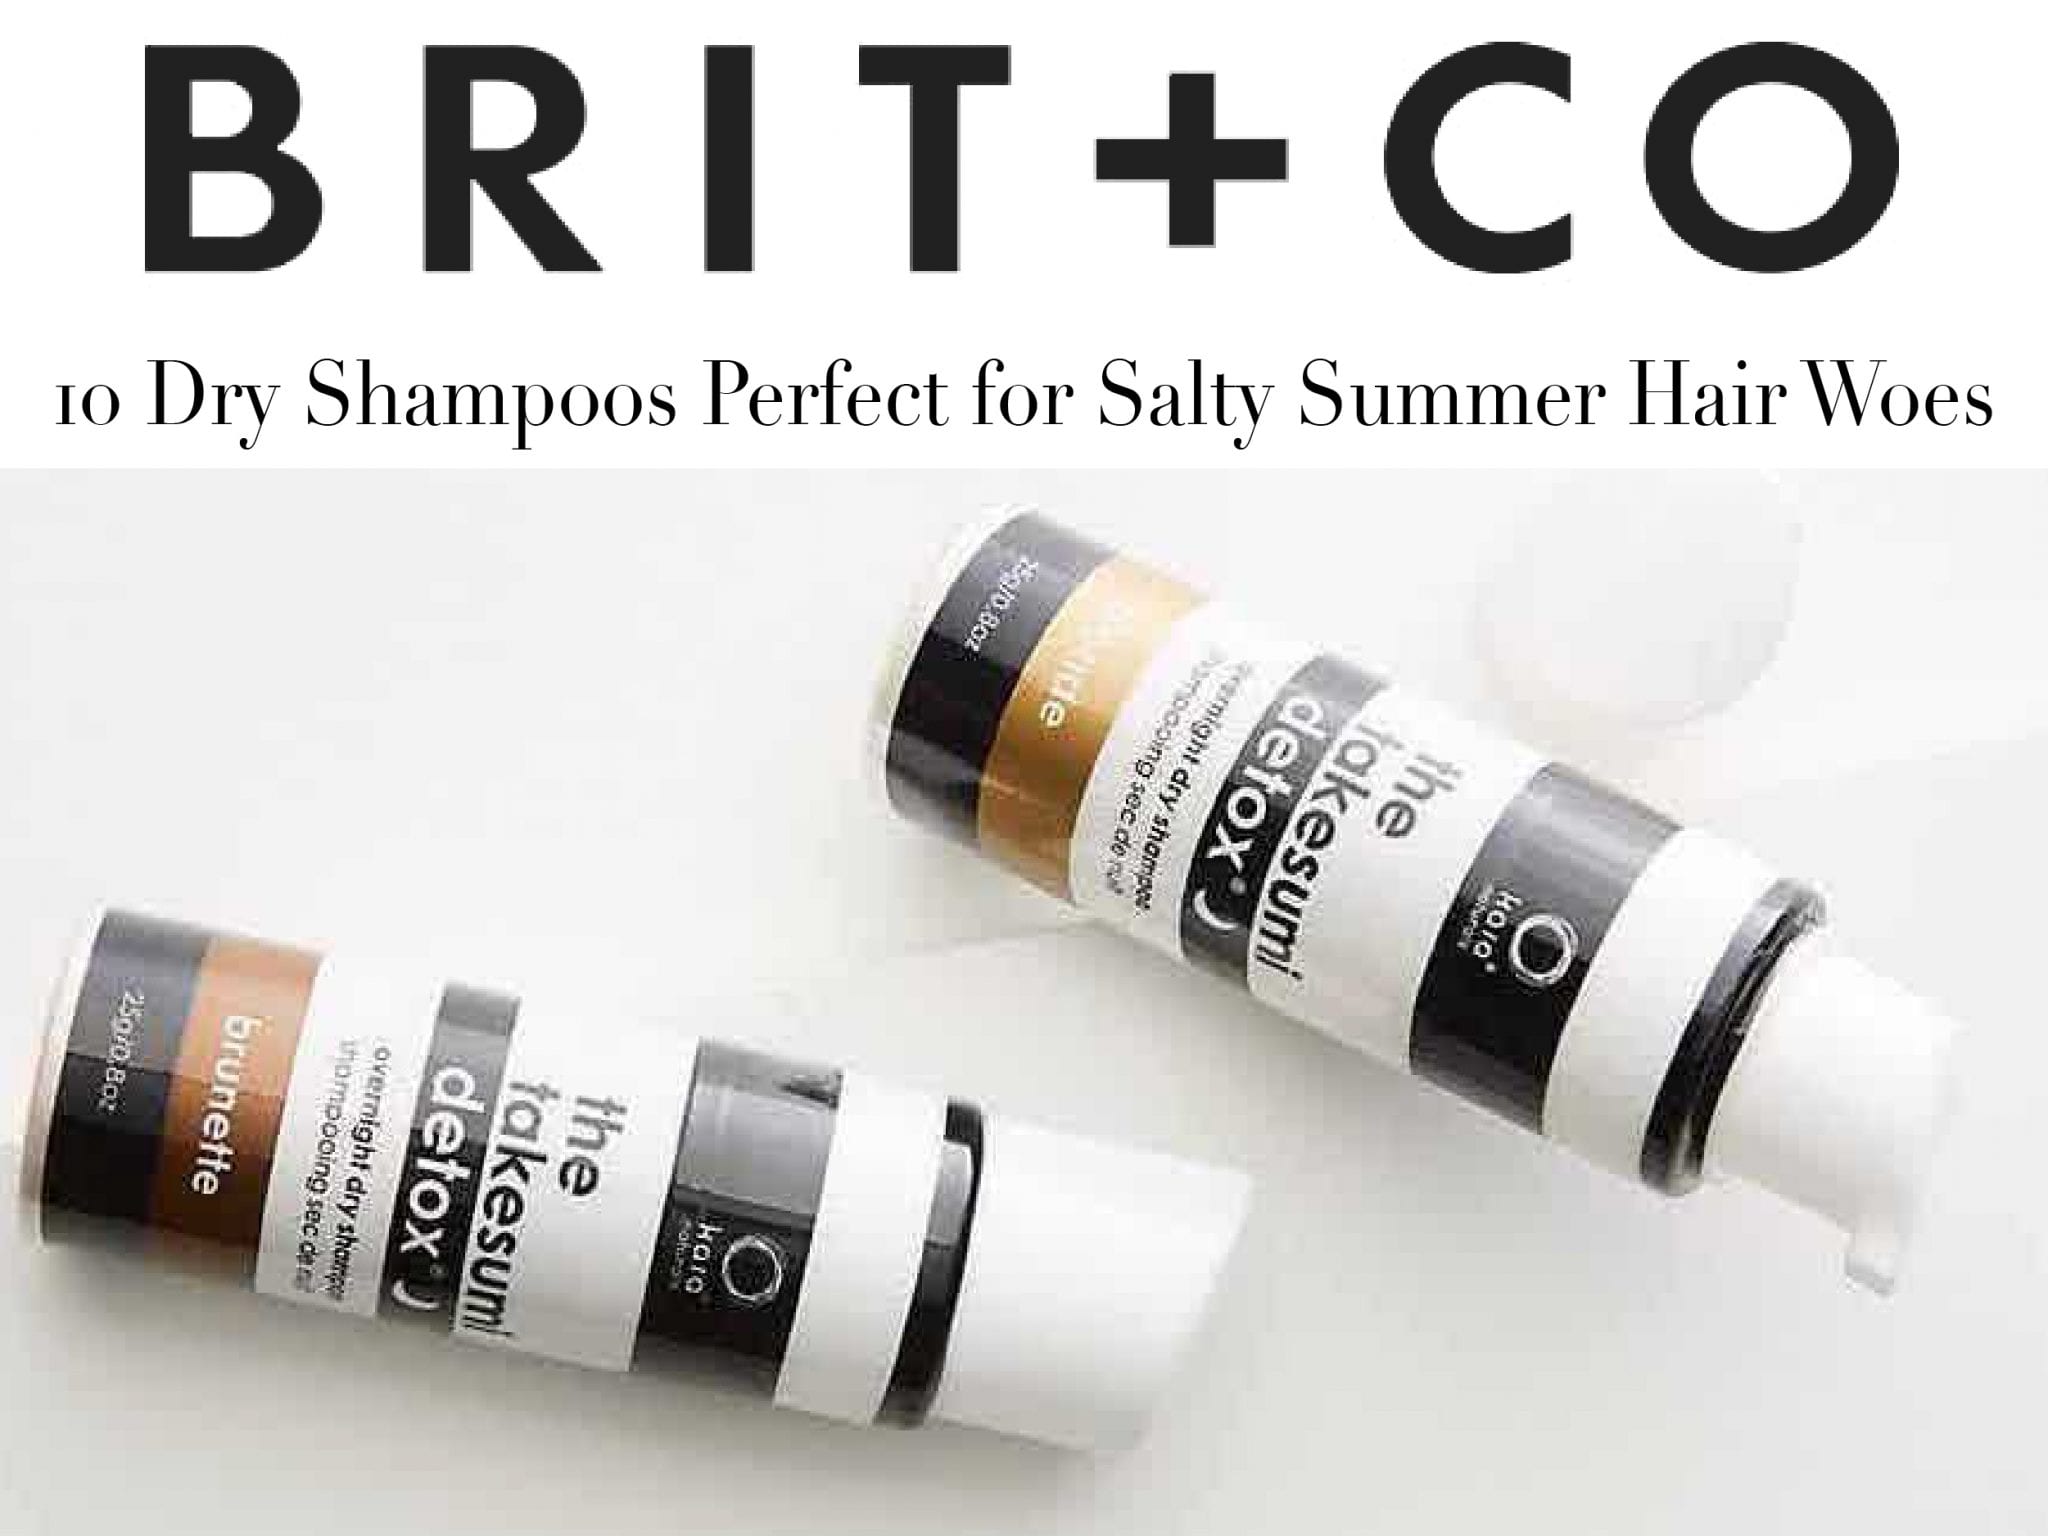 Brit+Co- 10 Dry Shampoos Perfect for Salty Summer Hair Woes